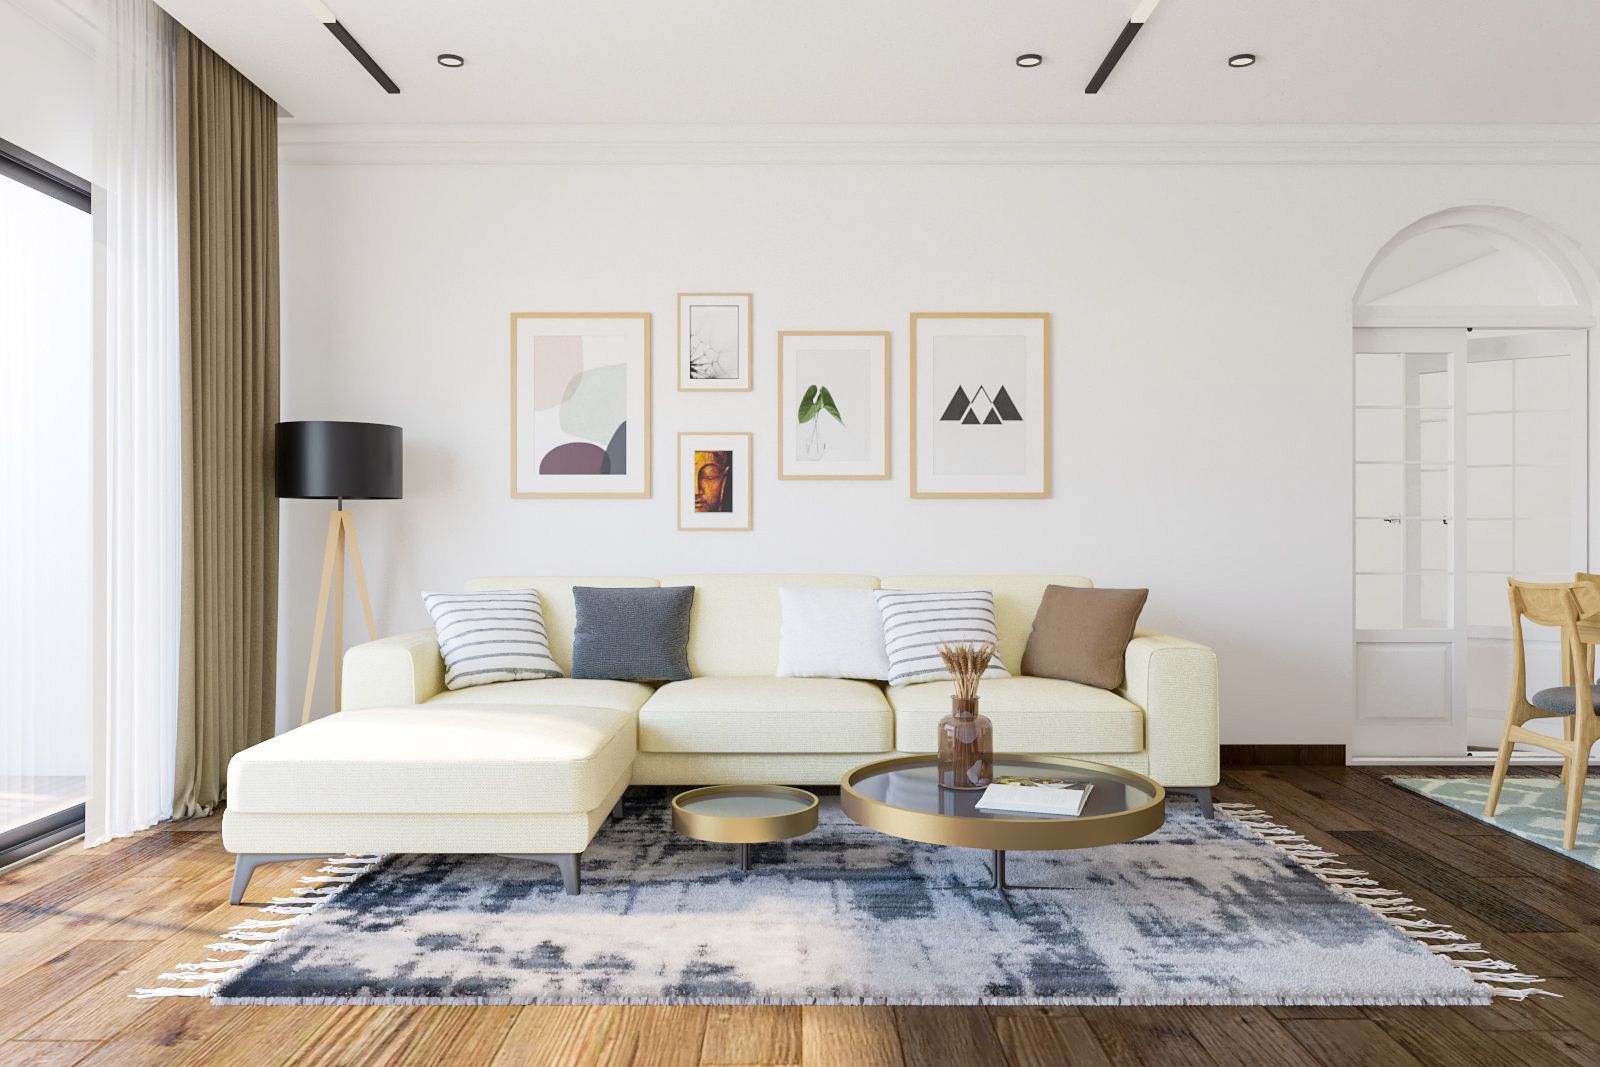 Minimal Living Room Design With Off-White L-Shaped Sectional Sofa